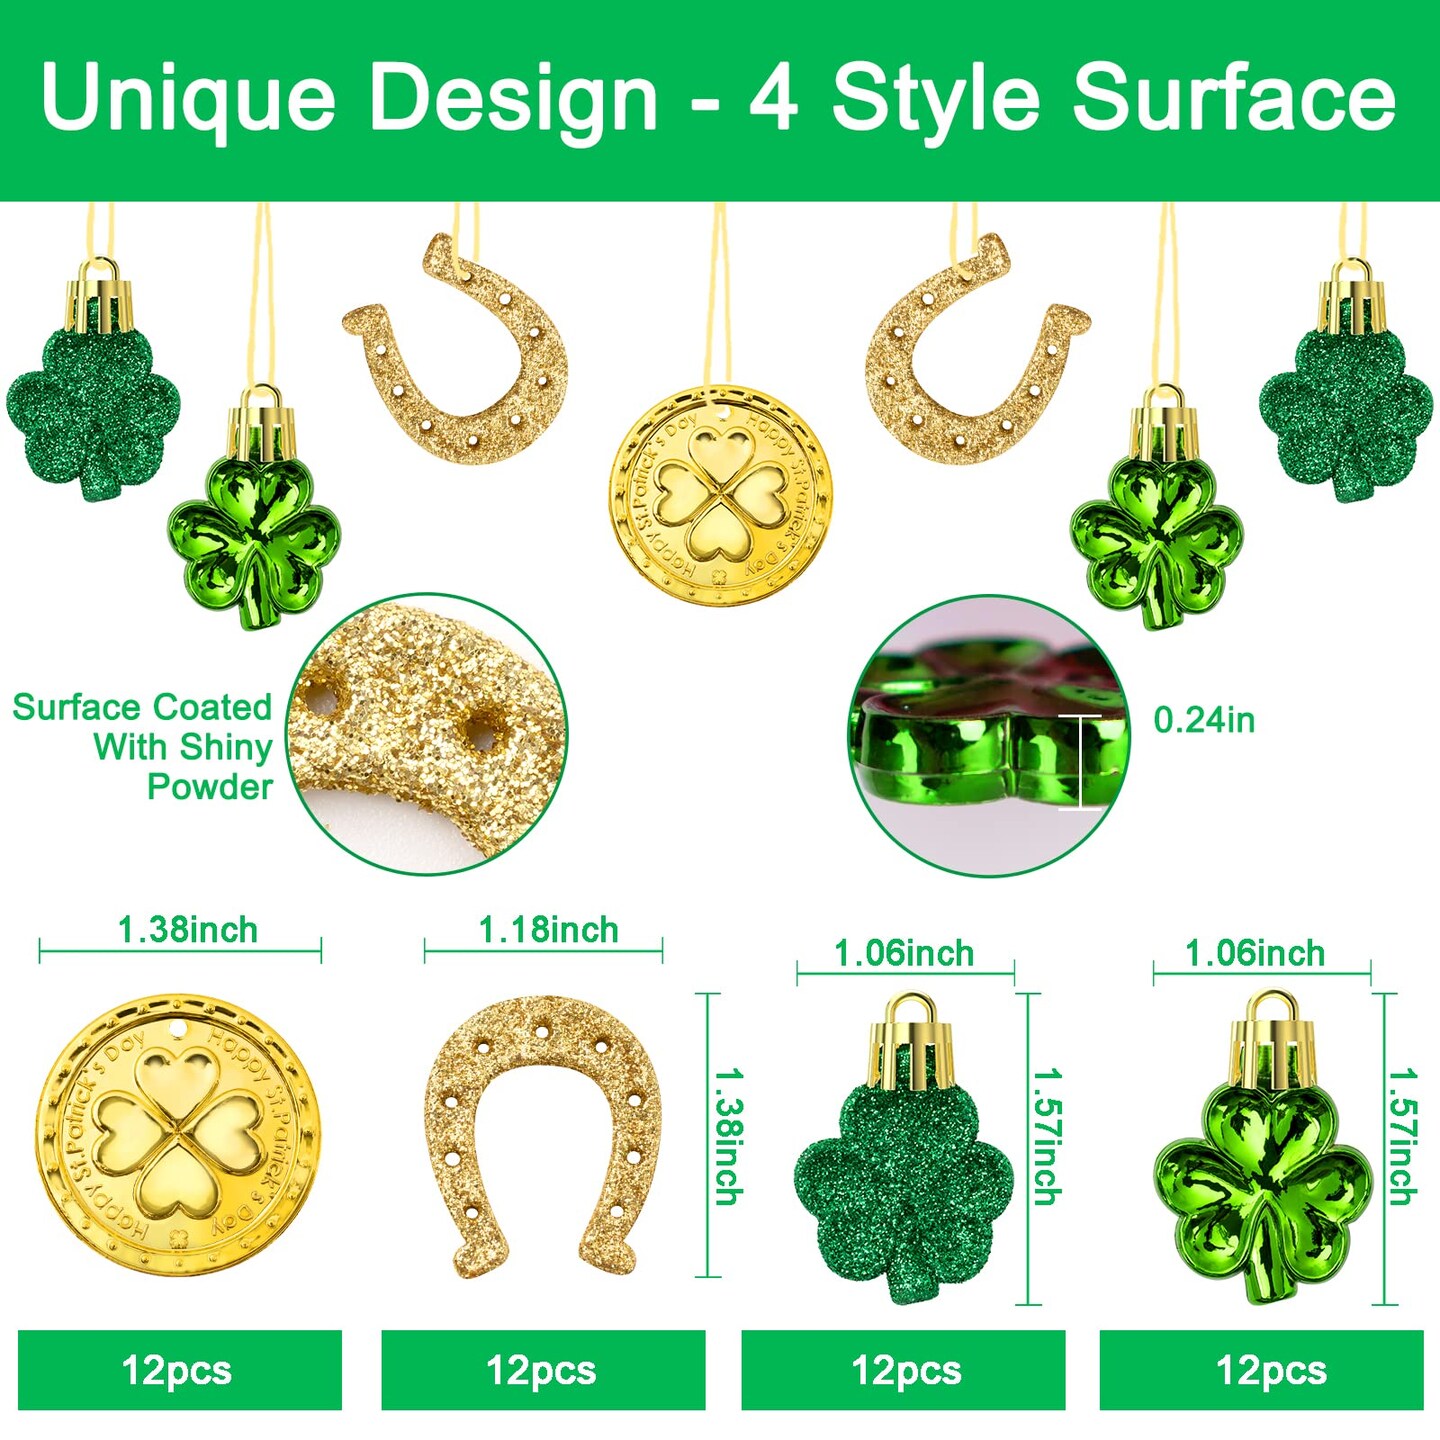 St. Patricks Day Decorations Shamrock Ornaments - 48pcs Shamrock Clover Gold Coins Horseshoe Tree Ornaments for Spring Lucky Irish Day St Patrick&#x27;s Day Home Table Tree Party Hanging Decorations